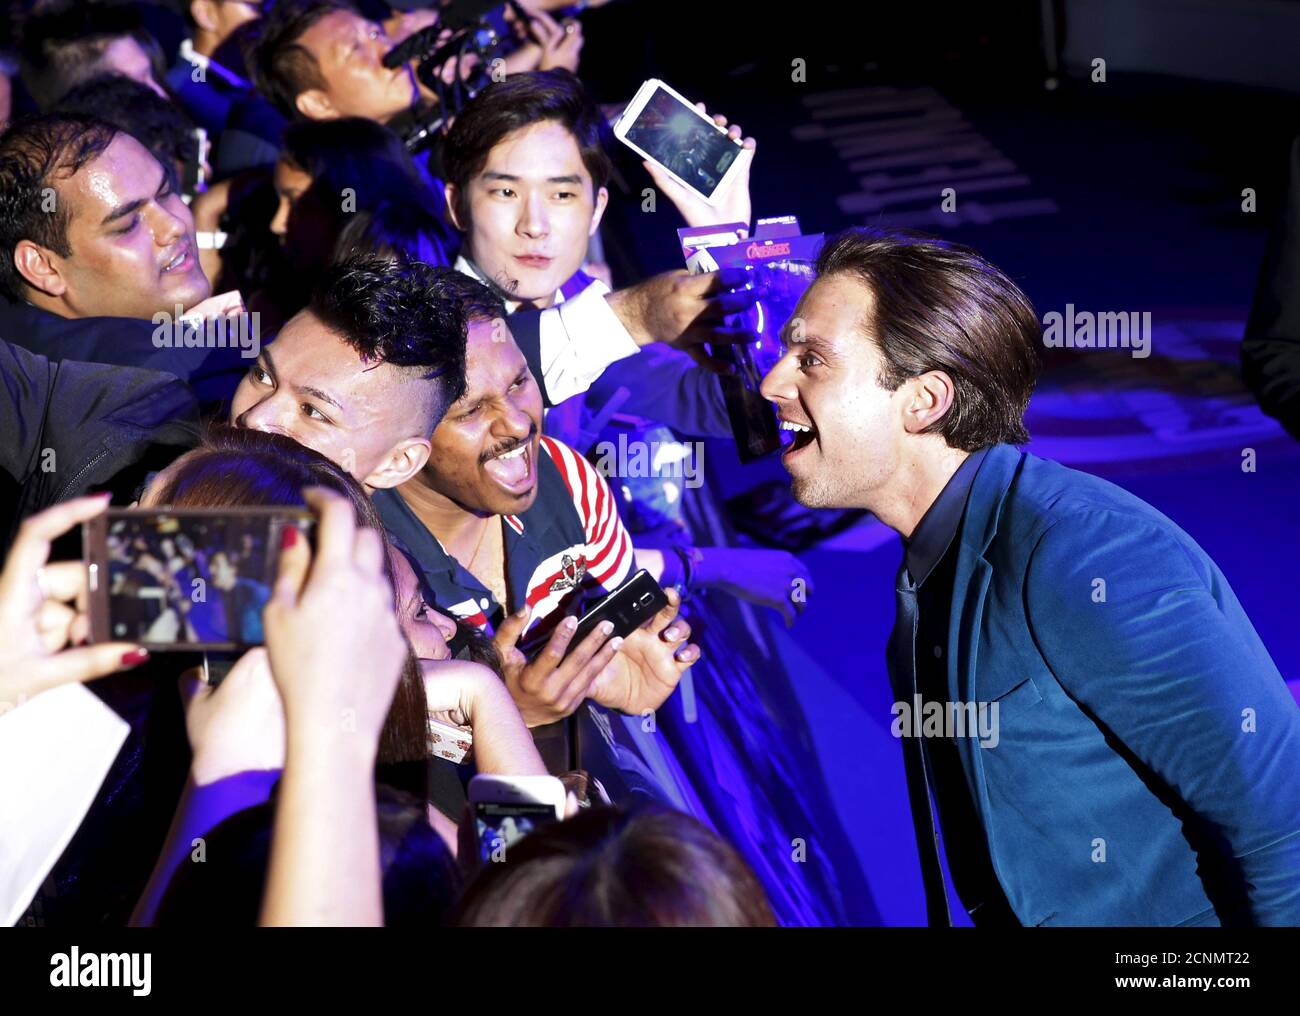 Actor Sebastian Stan mingles with fans during a blue carpet event for the movie 'Captain America Civil War' in Singapore, April 21, 2016. REUTERS/Edgar Su Stock Photo